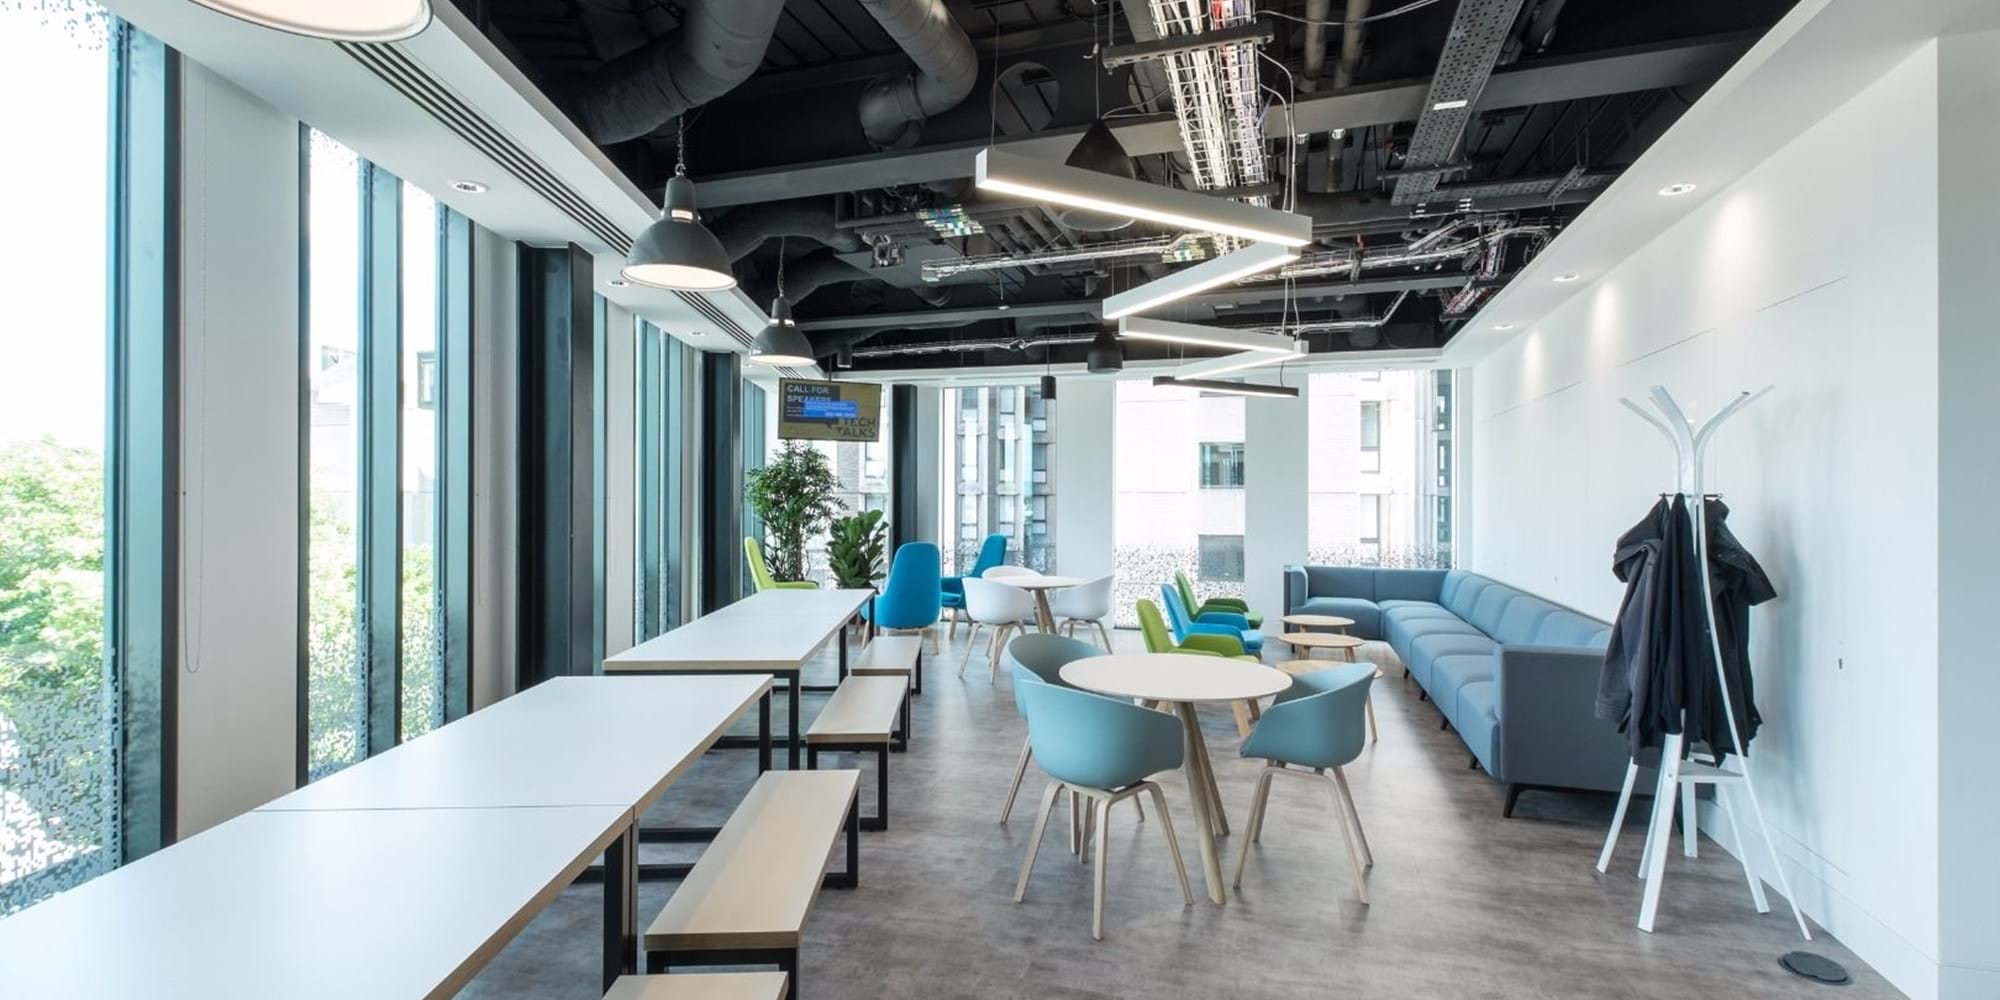 Modus Workspace office design, fit out and refurbishment - Skyscanner - Skyscanner.jpg